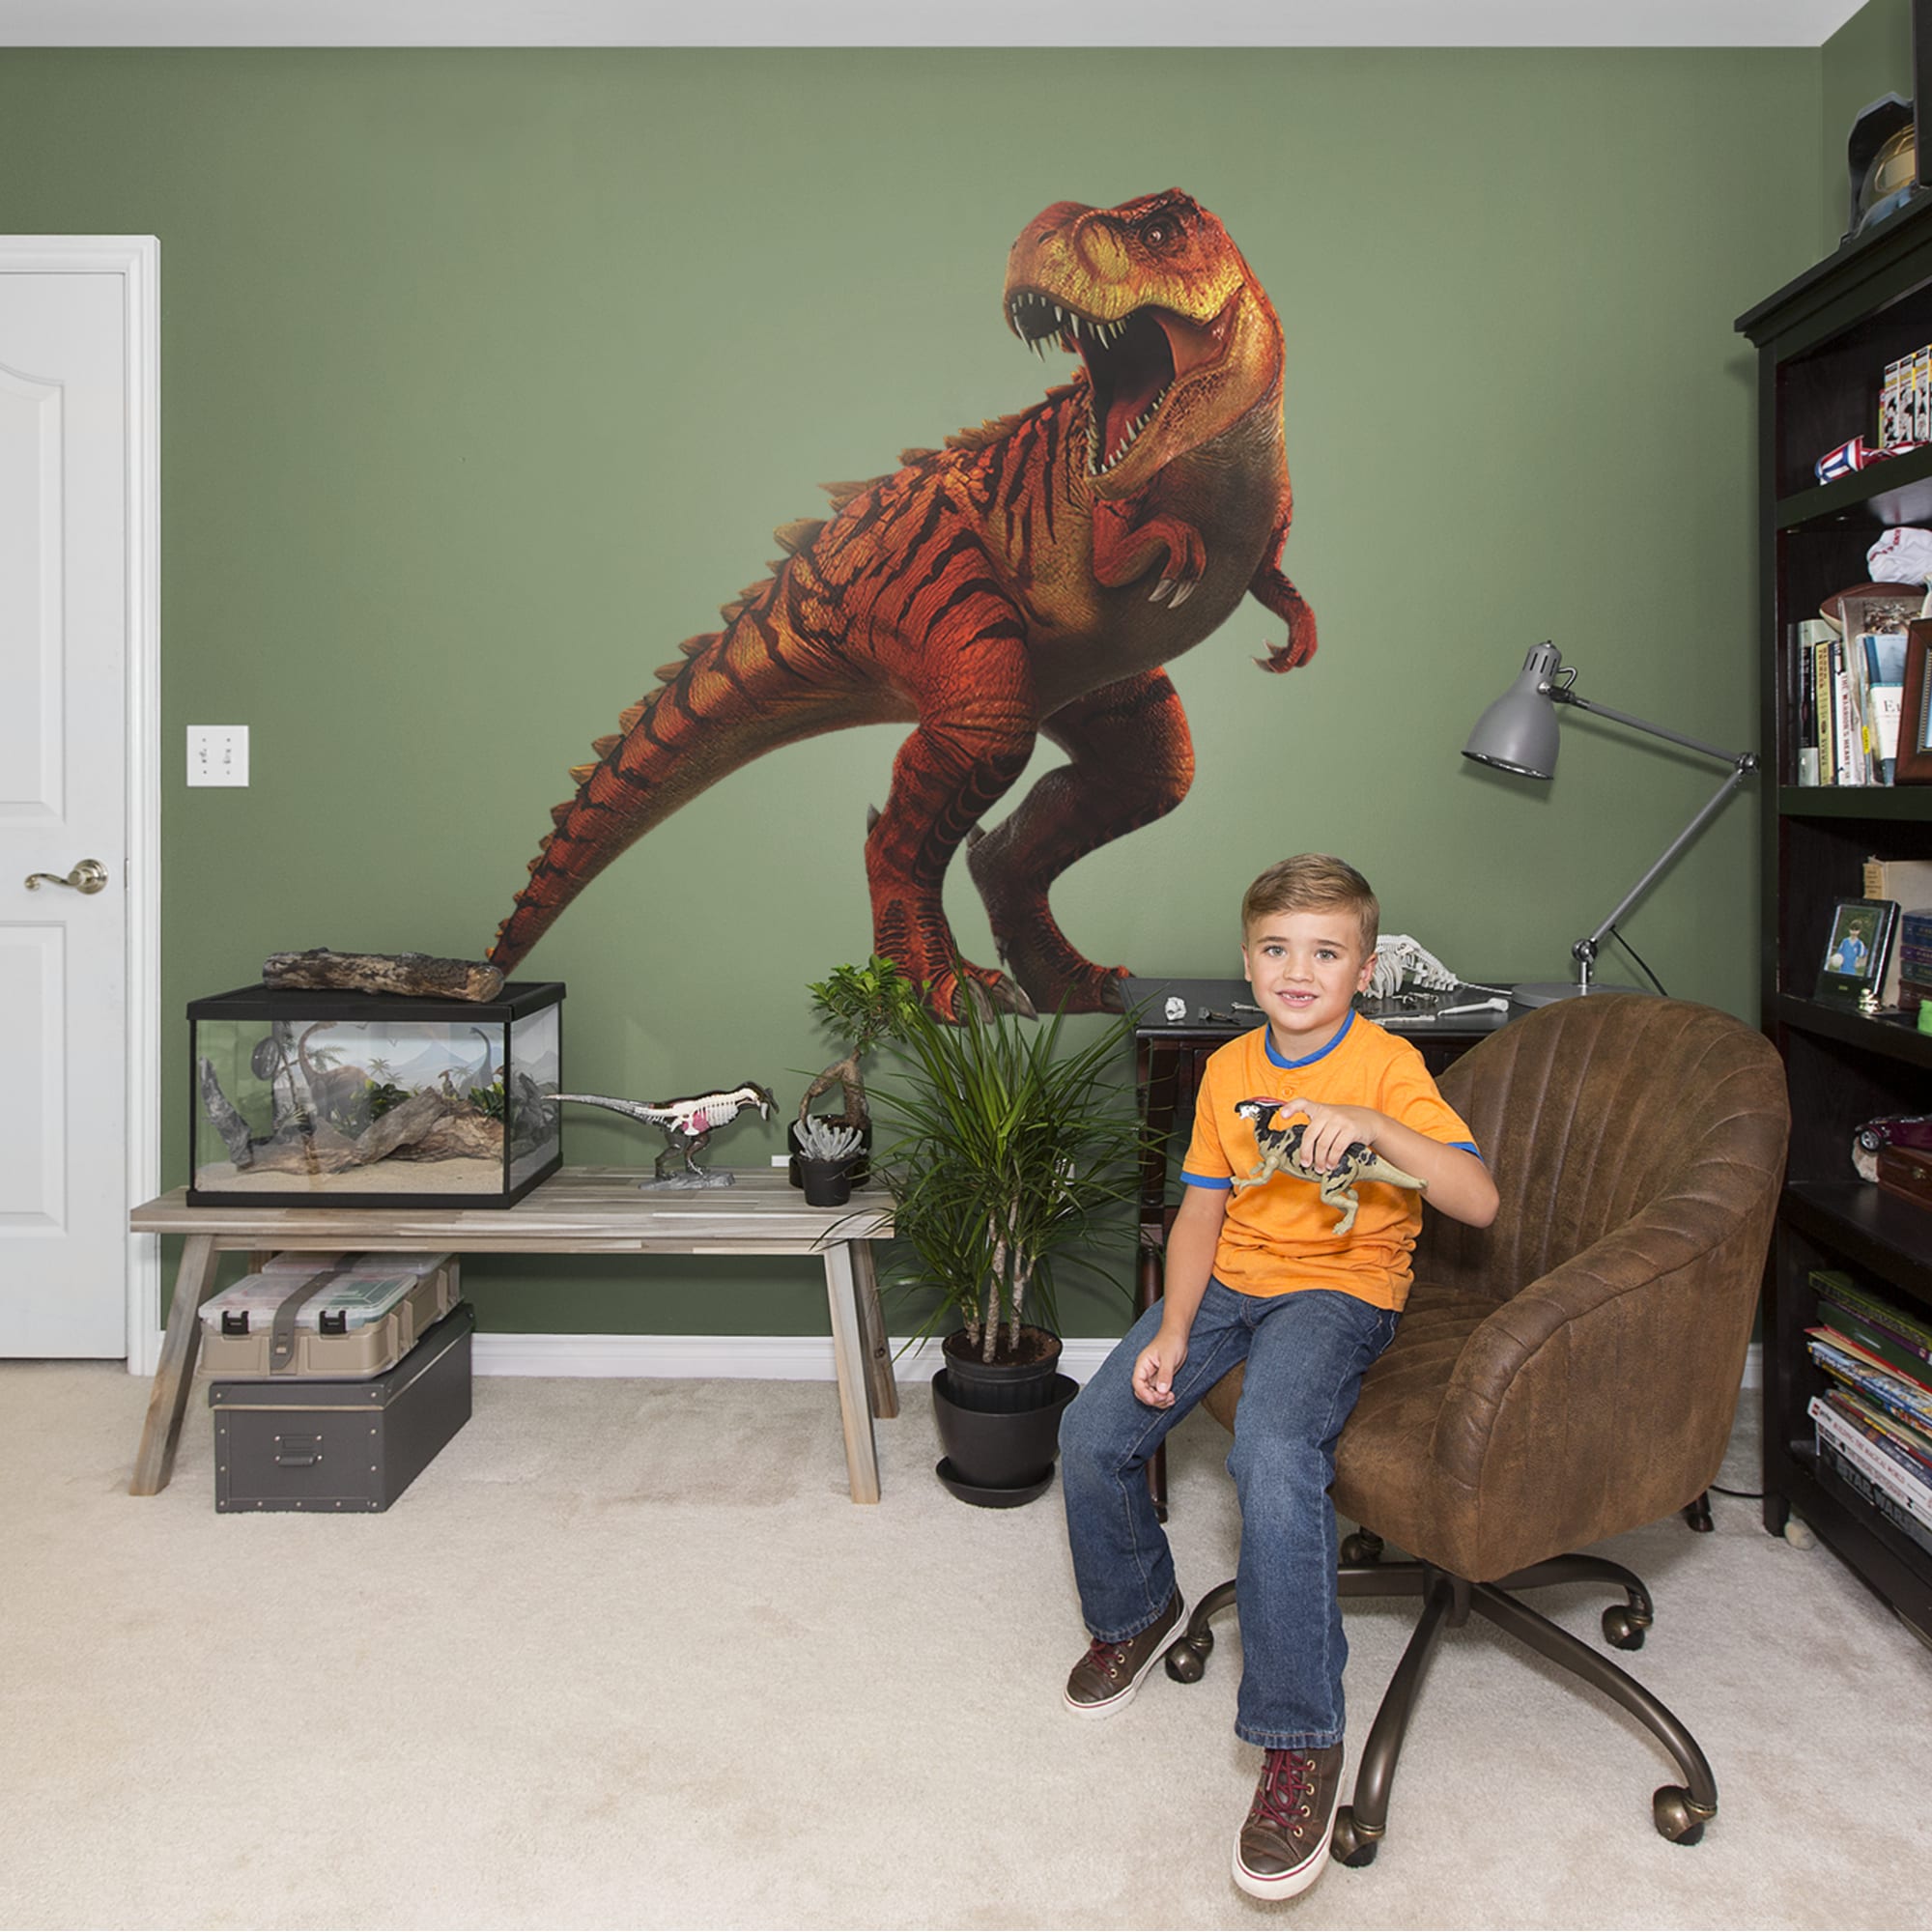 Tyrannosaurus Rex Hybrid: Jurassic World - Officially Licensed Removable Wall Decal 64.0"W x 64.0"H by Fathead | Vinyl